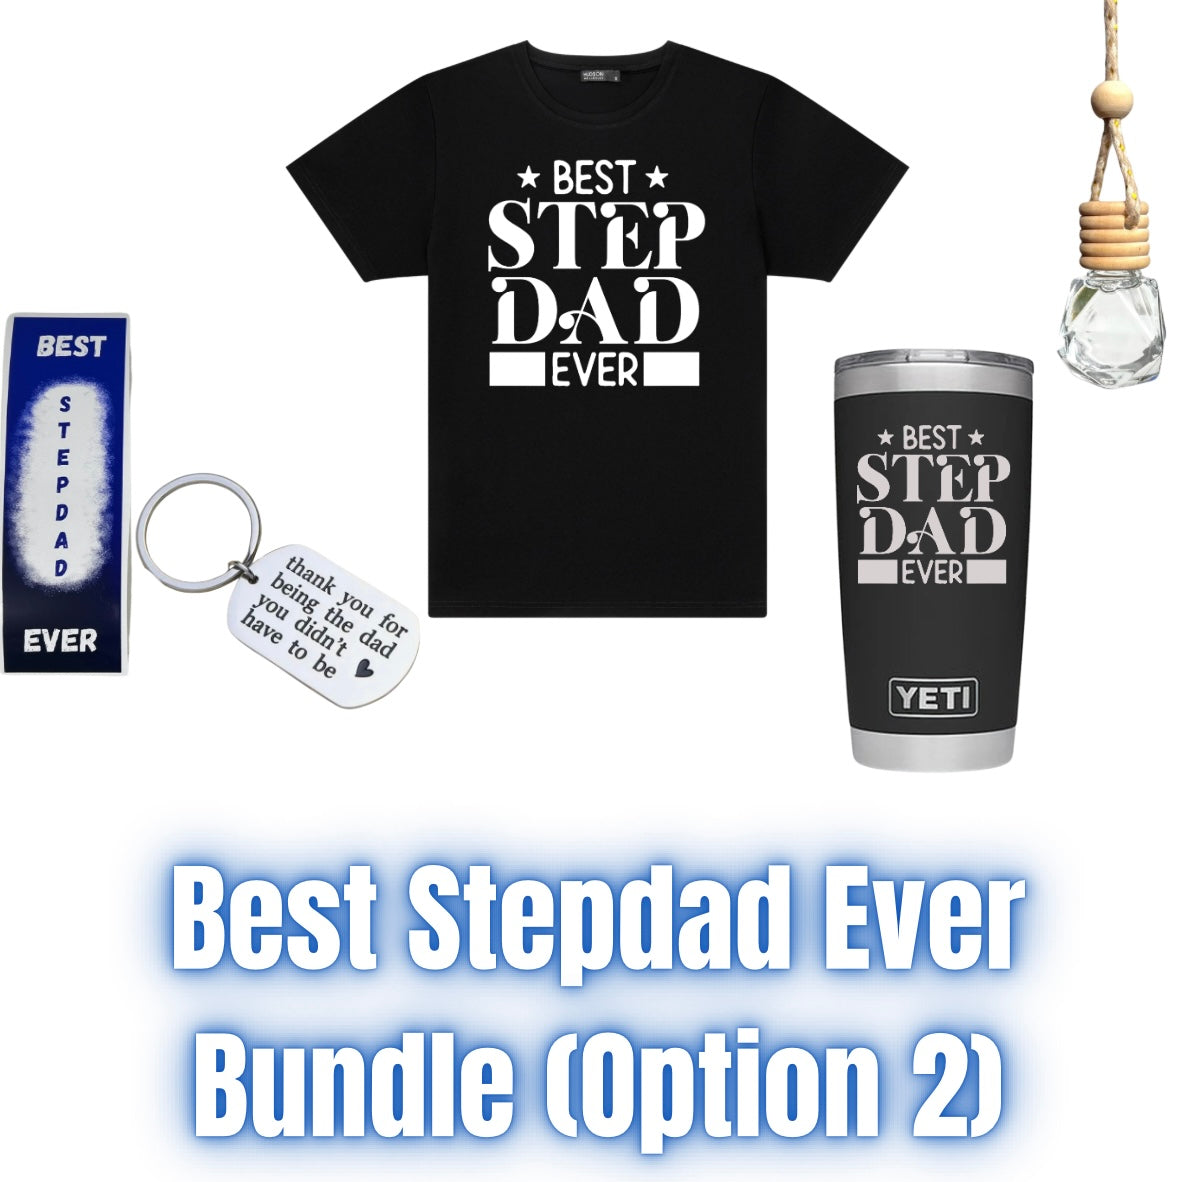 Father’s Day Bundle!